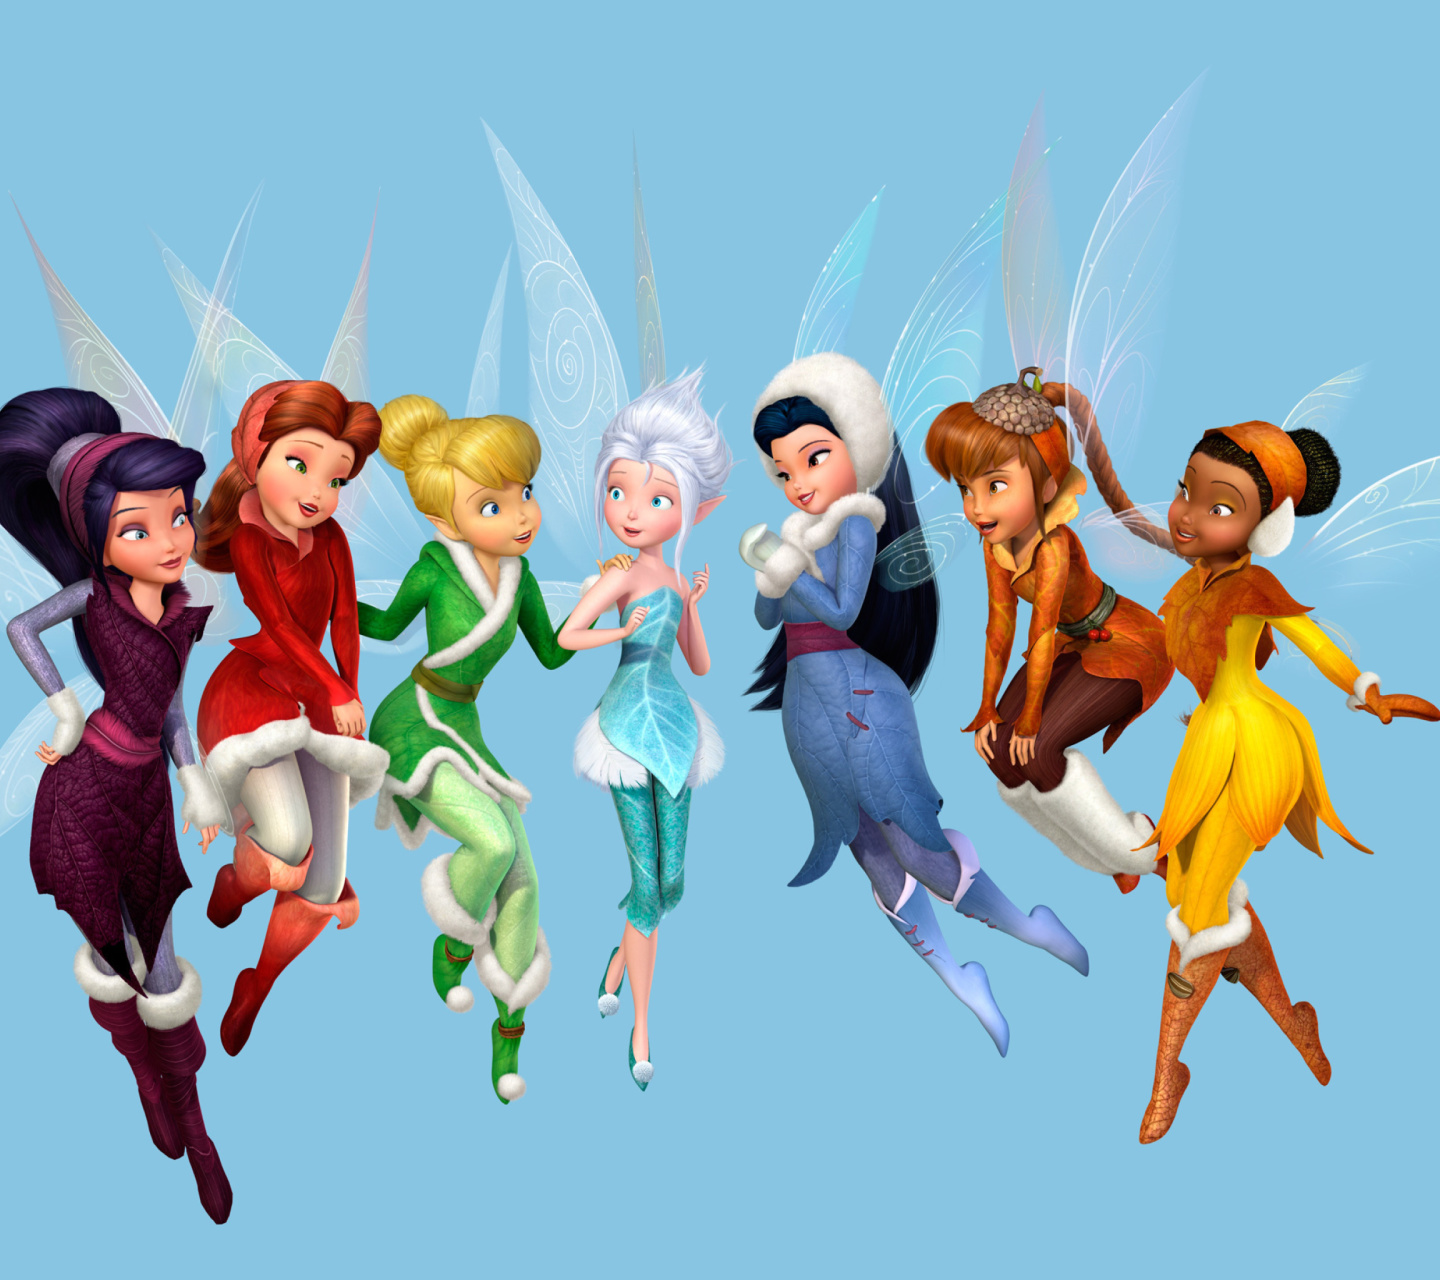 Das Tinkerbell and the Mysterious Winter Woods Wallpaper 1440x1280